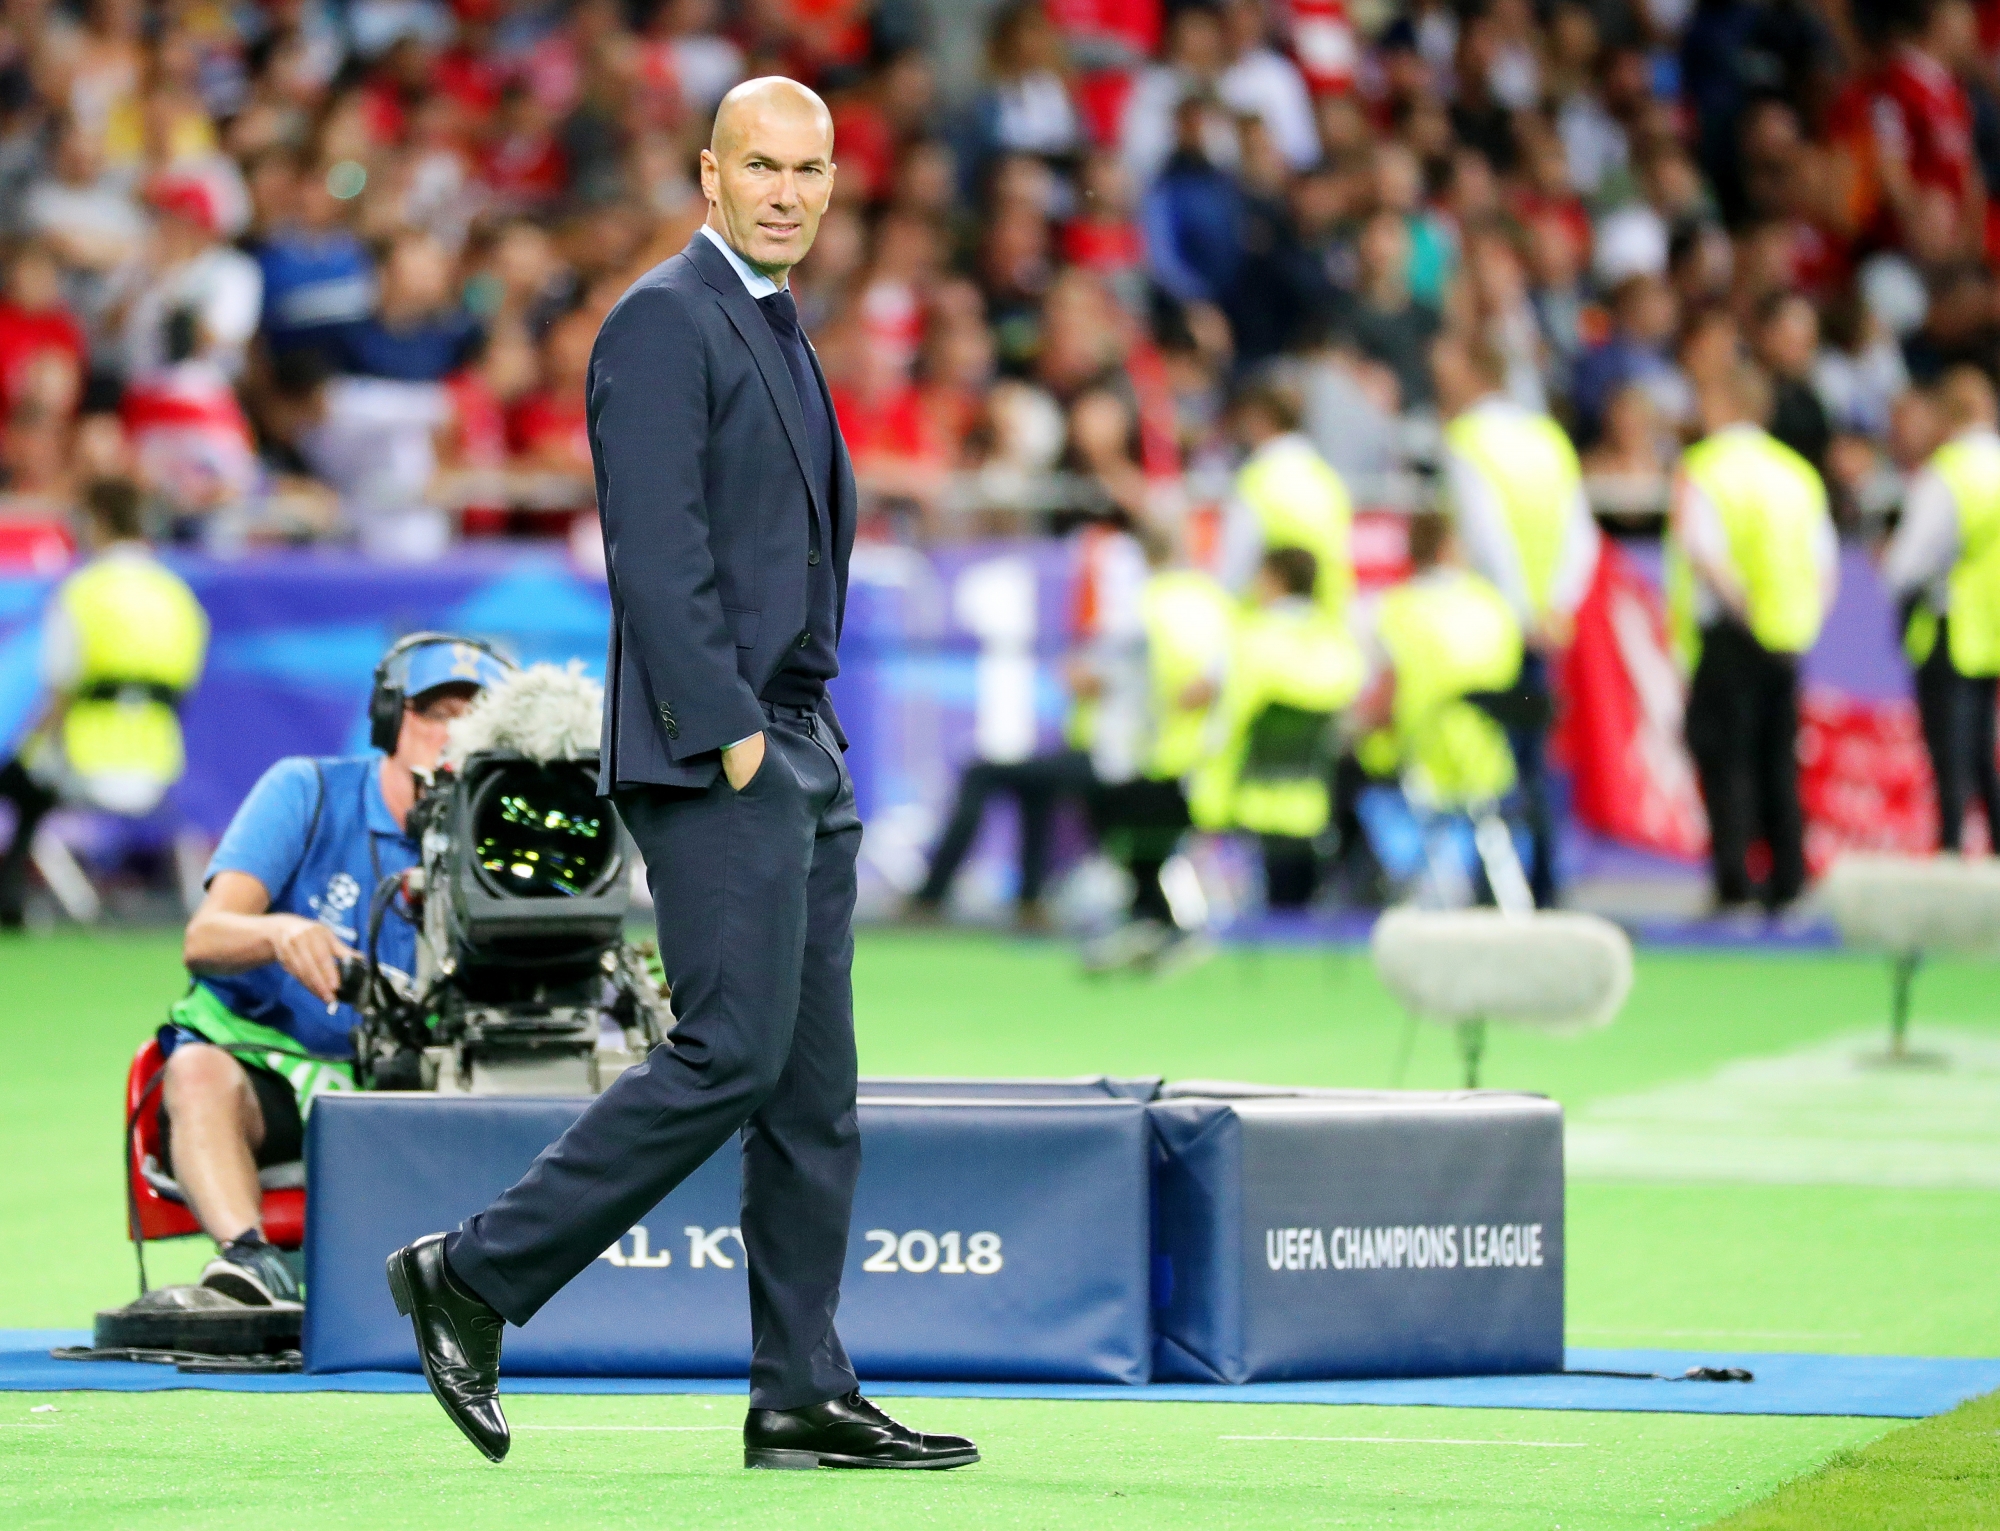 epa06775200 (FILE) - Real Madrid's head coach Zinedine Zidane during the UEFA Champions League final between Real Madrid and Liverpool FC at the NSC Olimpiyskiy stadium in Kiev, Ukraine, 26 May 2018 (reissued 31 May 2018). Zinedine Zidane announced on 31 May 2018 that he has stepped down as Real Madrid head coach after leading the Spanish Primera Division soccer club to three UEFA Champions League titles in a row.  EPA/ARMANDO BABANI (FILE) UKRAINE SOCCER ZIDANE